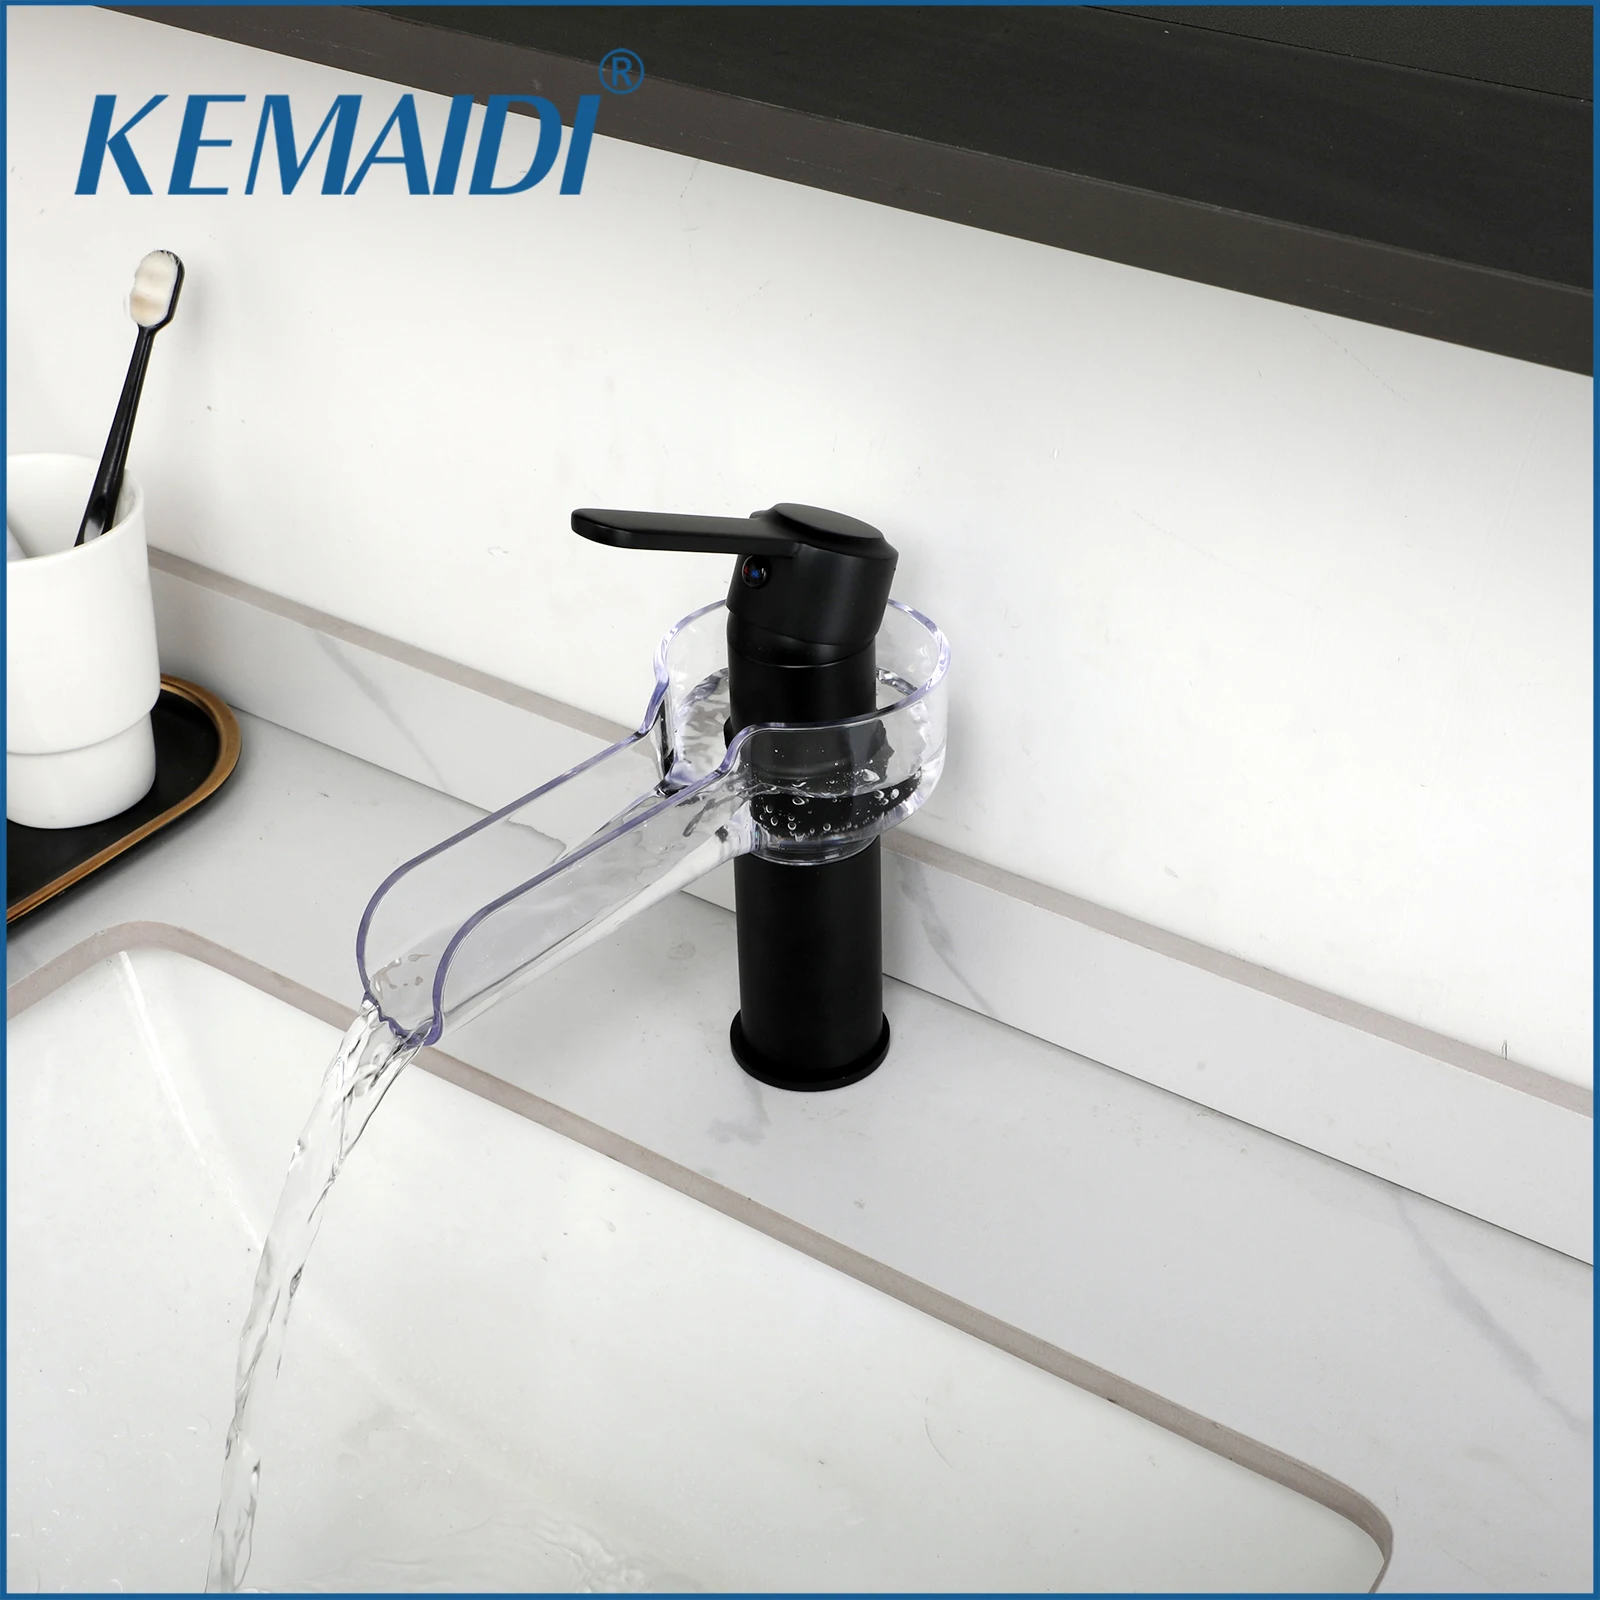 

KEMAIDI Bathroom Faucet Solid Brass Bathroom Basin Faucets w/Waterfall Spout Cold And Hot Water Mixer Sink Tap Deck Mounted